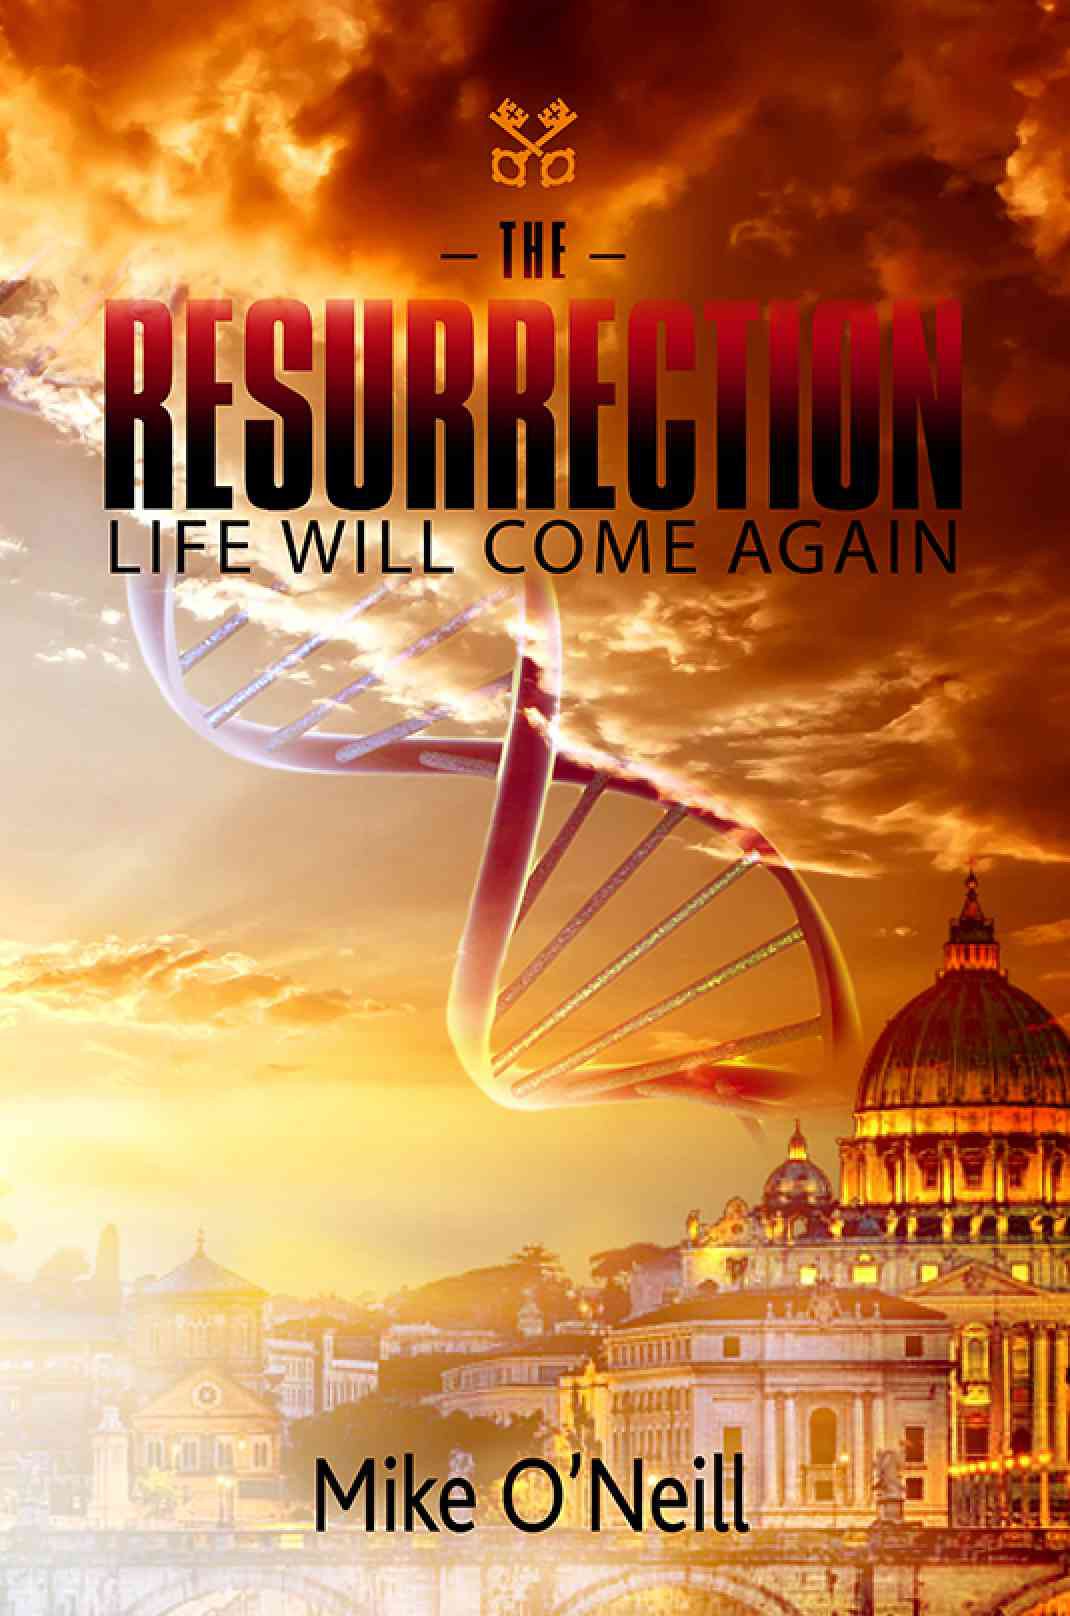 The Resurrection by Mike O' Neil Got Featured on Fupping.Com